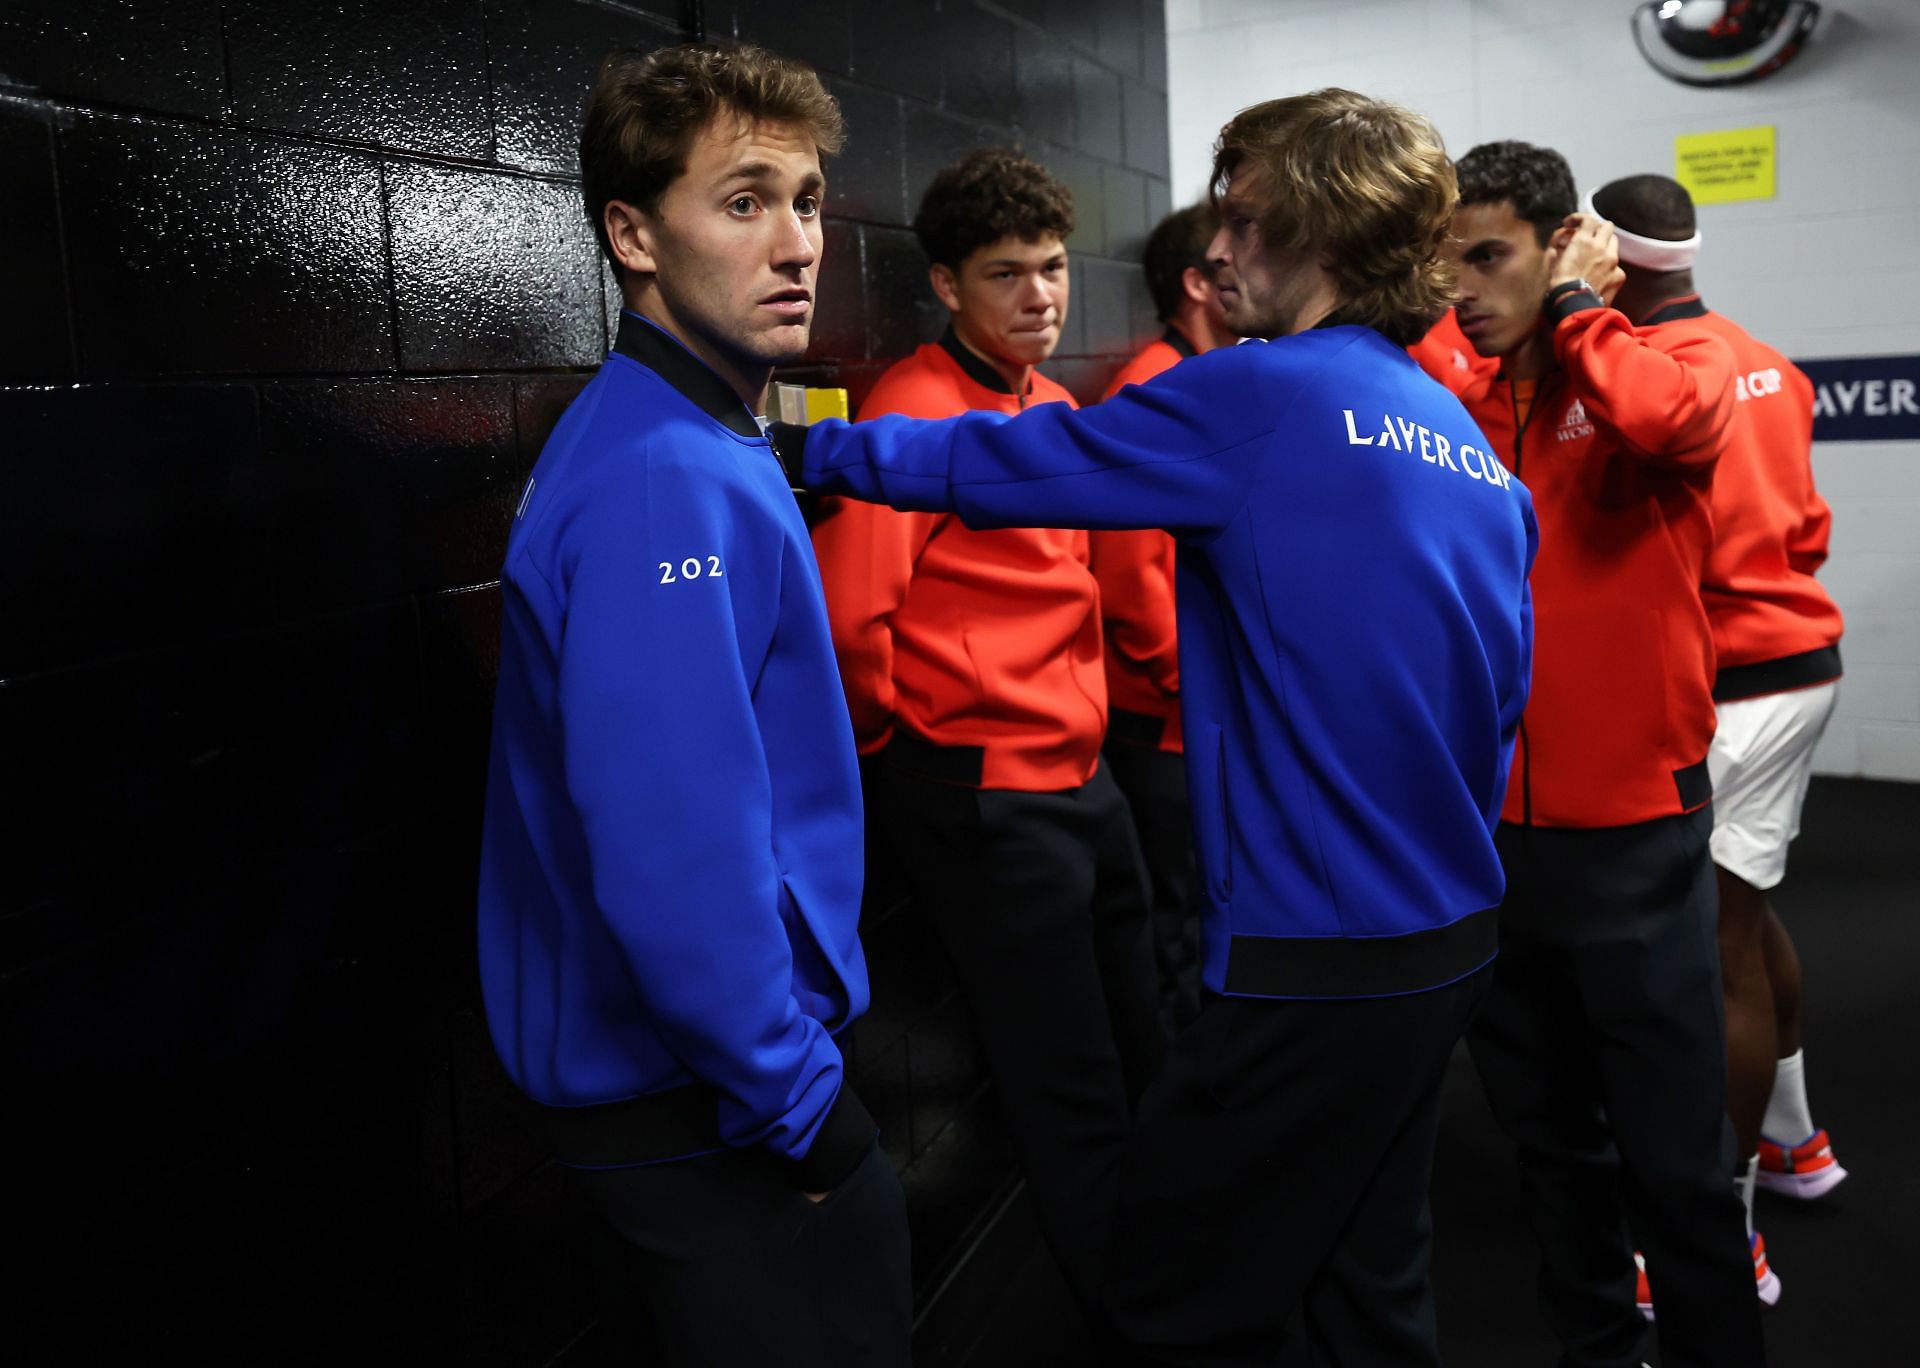 Casper Ruud and Andrey Rublev of Team Europe alongside Team World at Laver Cup 2023